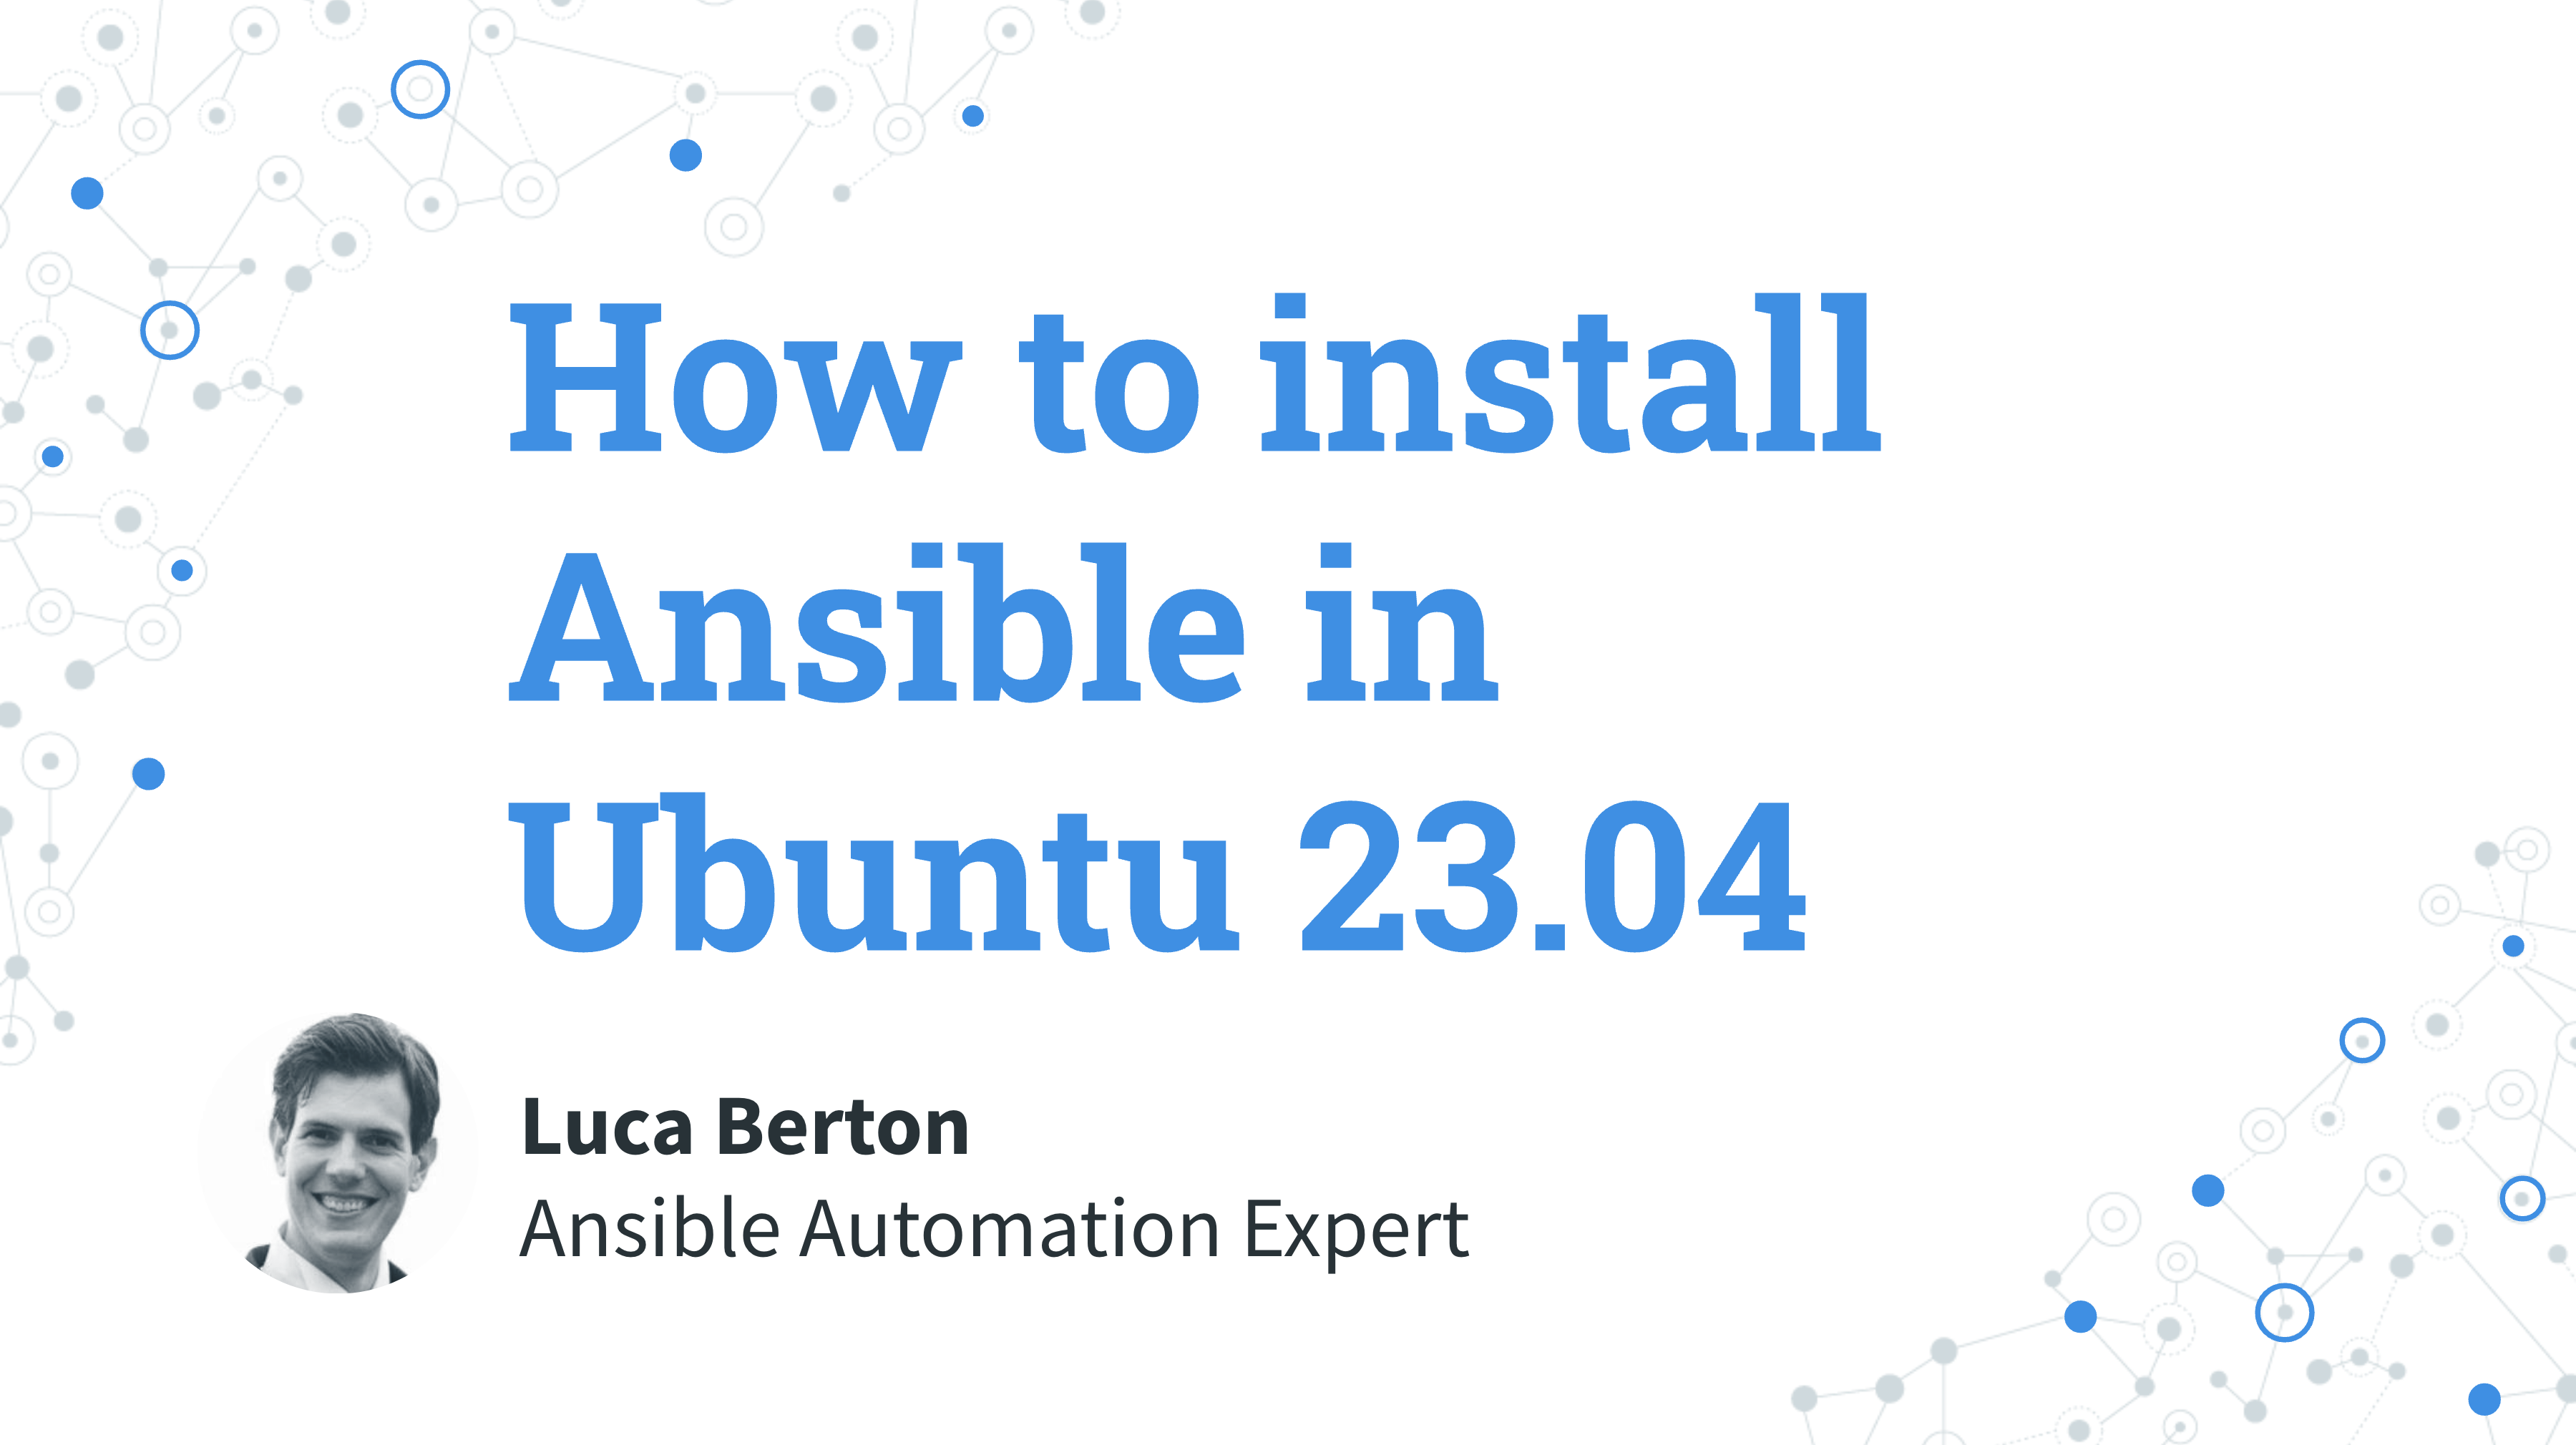 How to install Ansible in Ubuntu 23.04 Lunar Lobster — Ansible Install